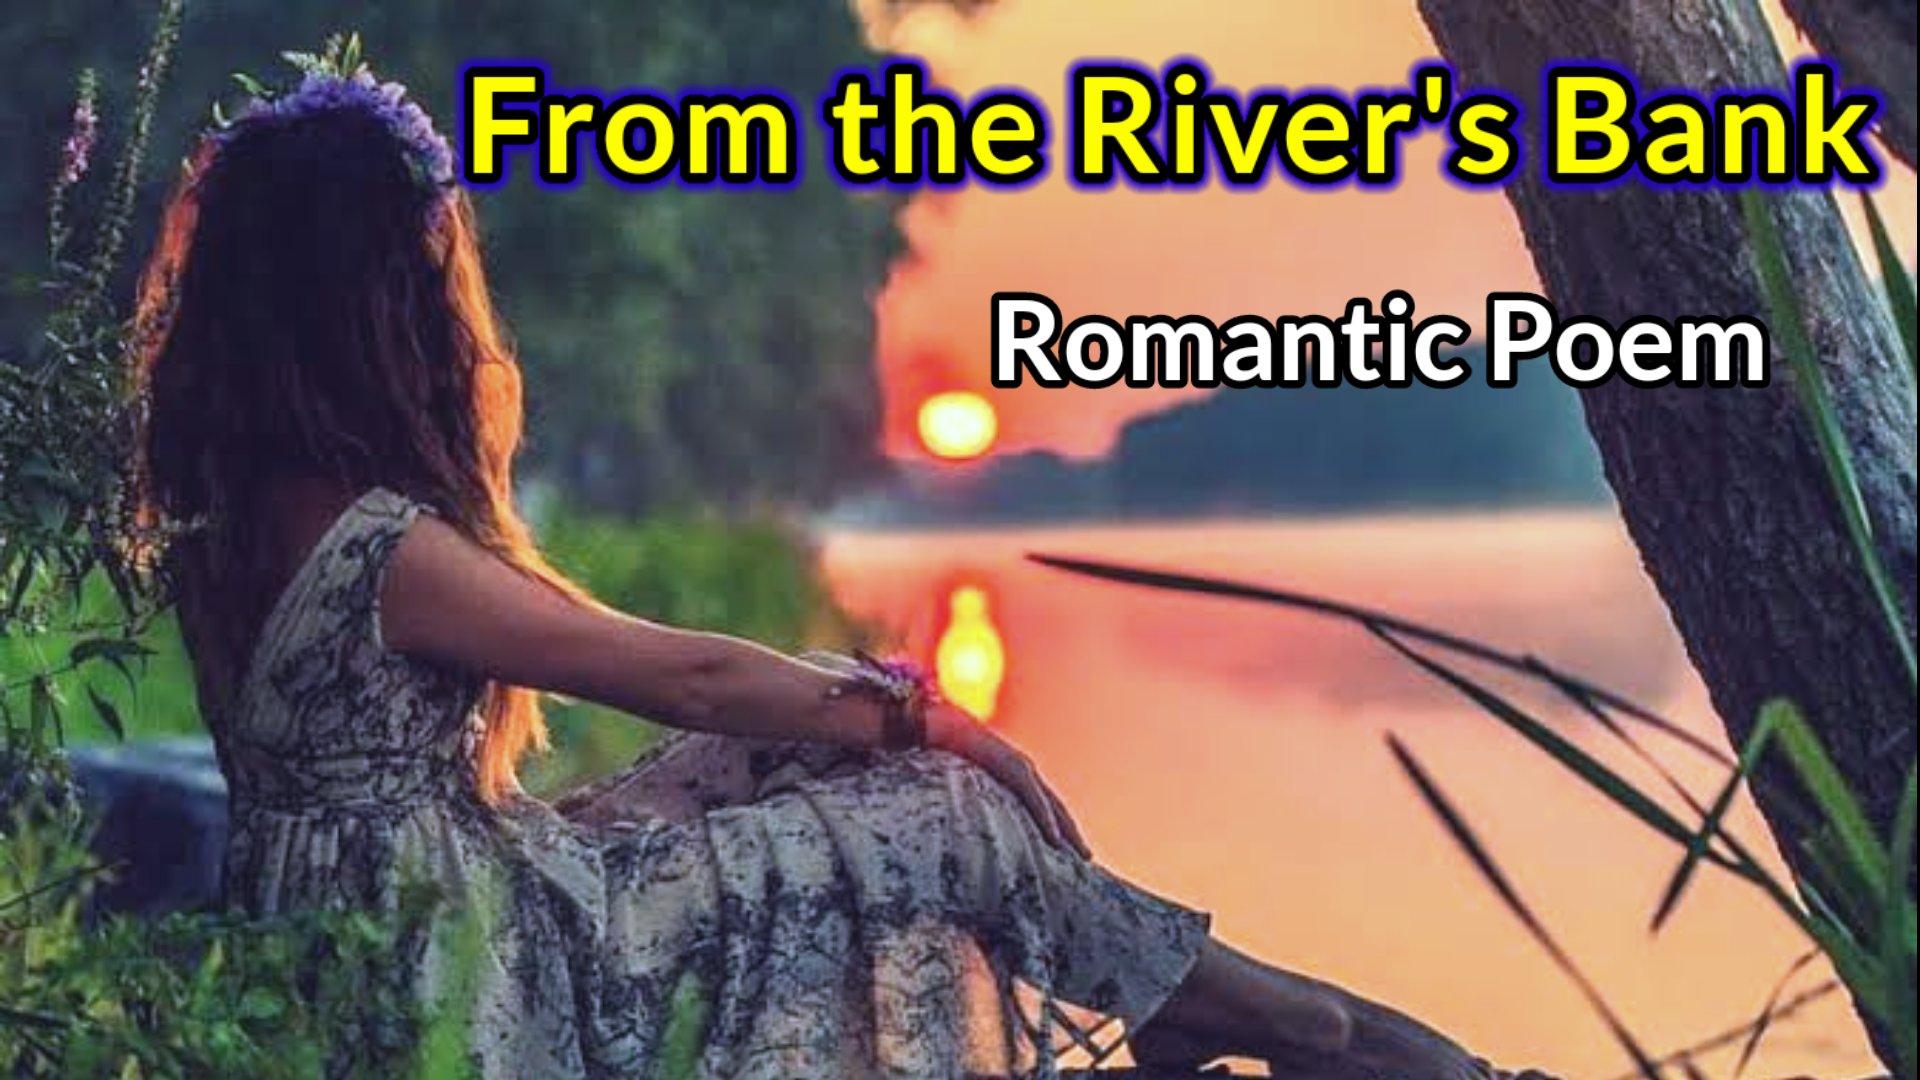 From the River's Bank- Romantic English Poem Written By Amrit Sahu